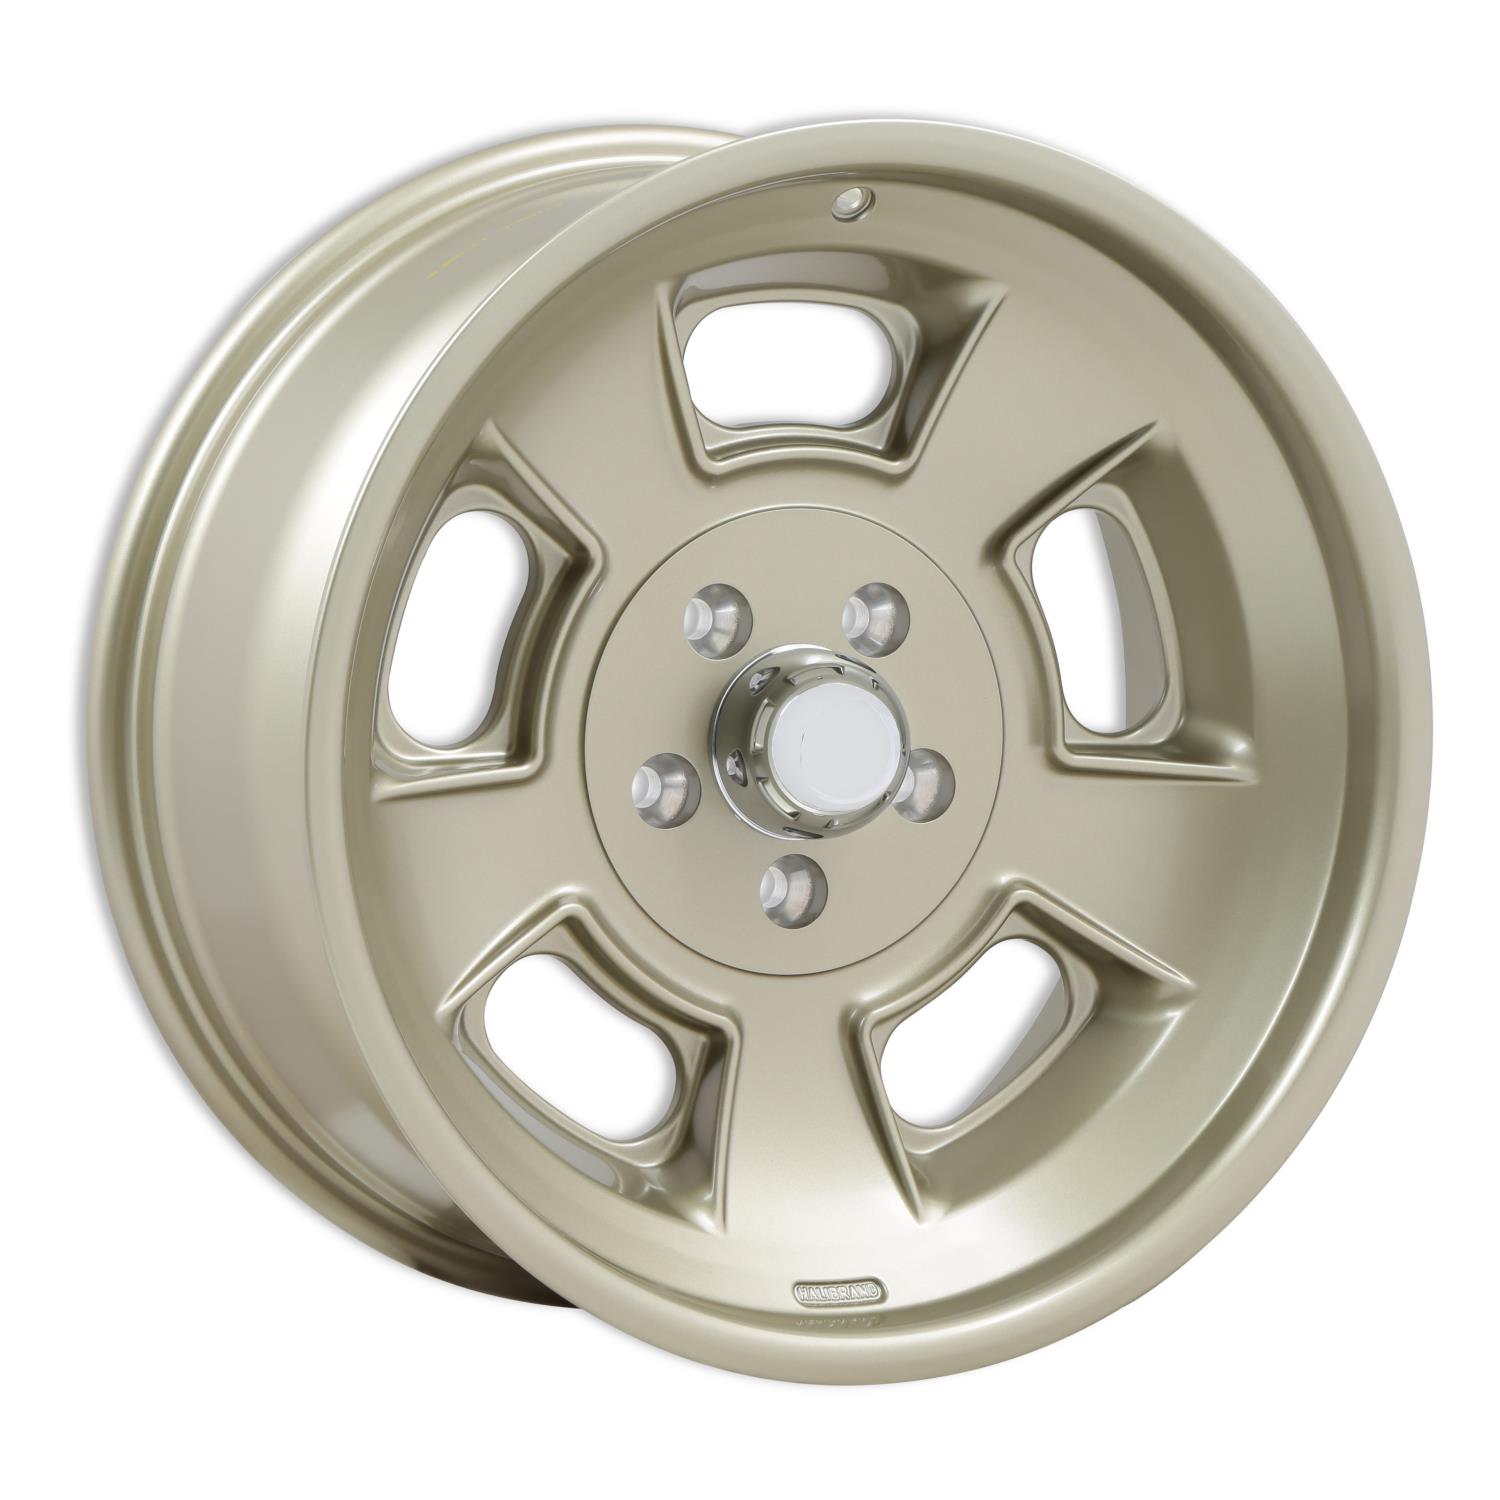 Sprint Front Wheel, Size: 19x8.5", Bolt Pattern: 5x5", Backspace: 4.5" [MAG7 - Semi Gloss Clearcoat]